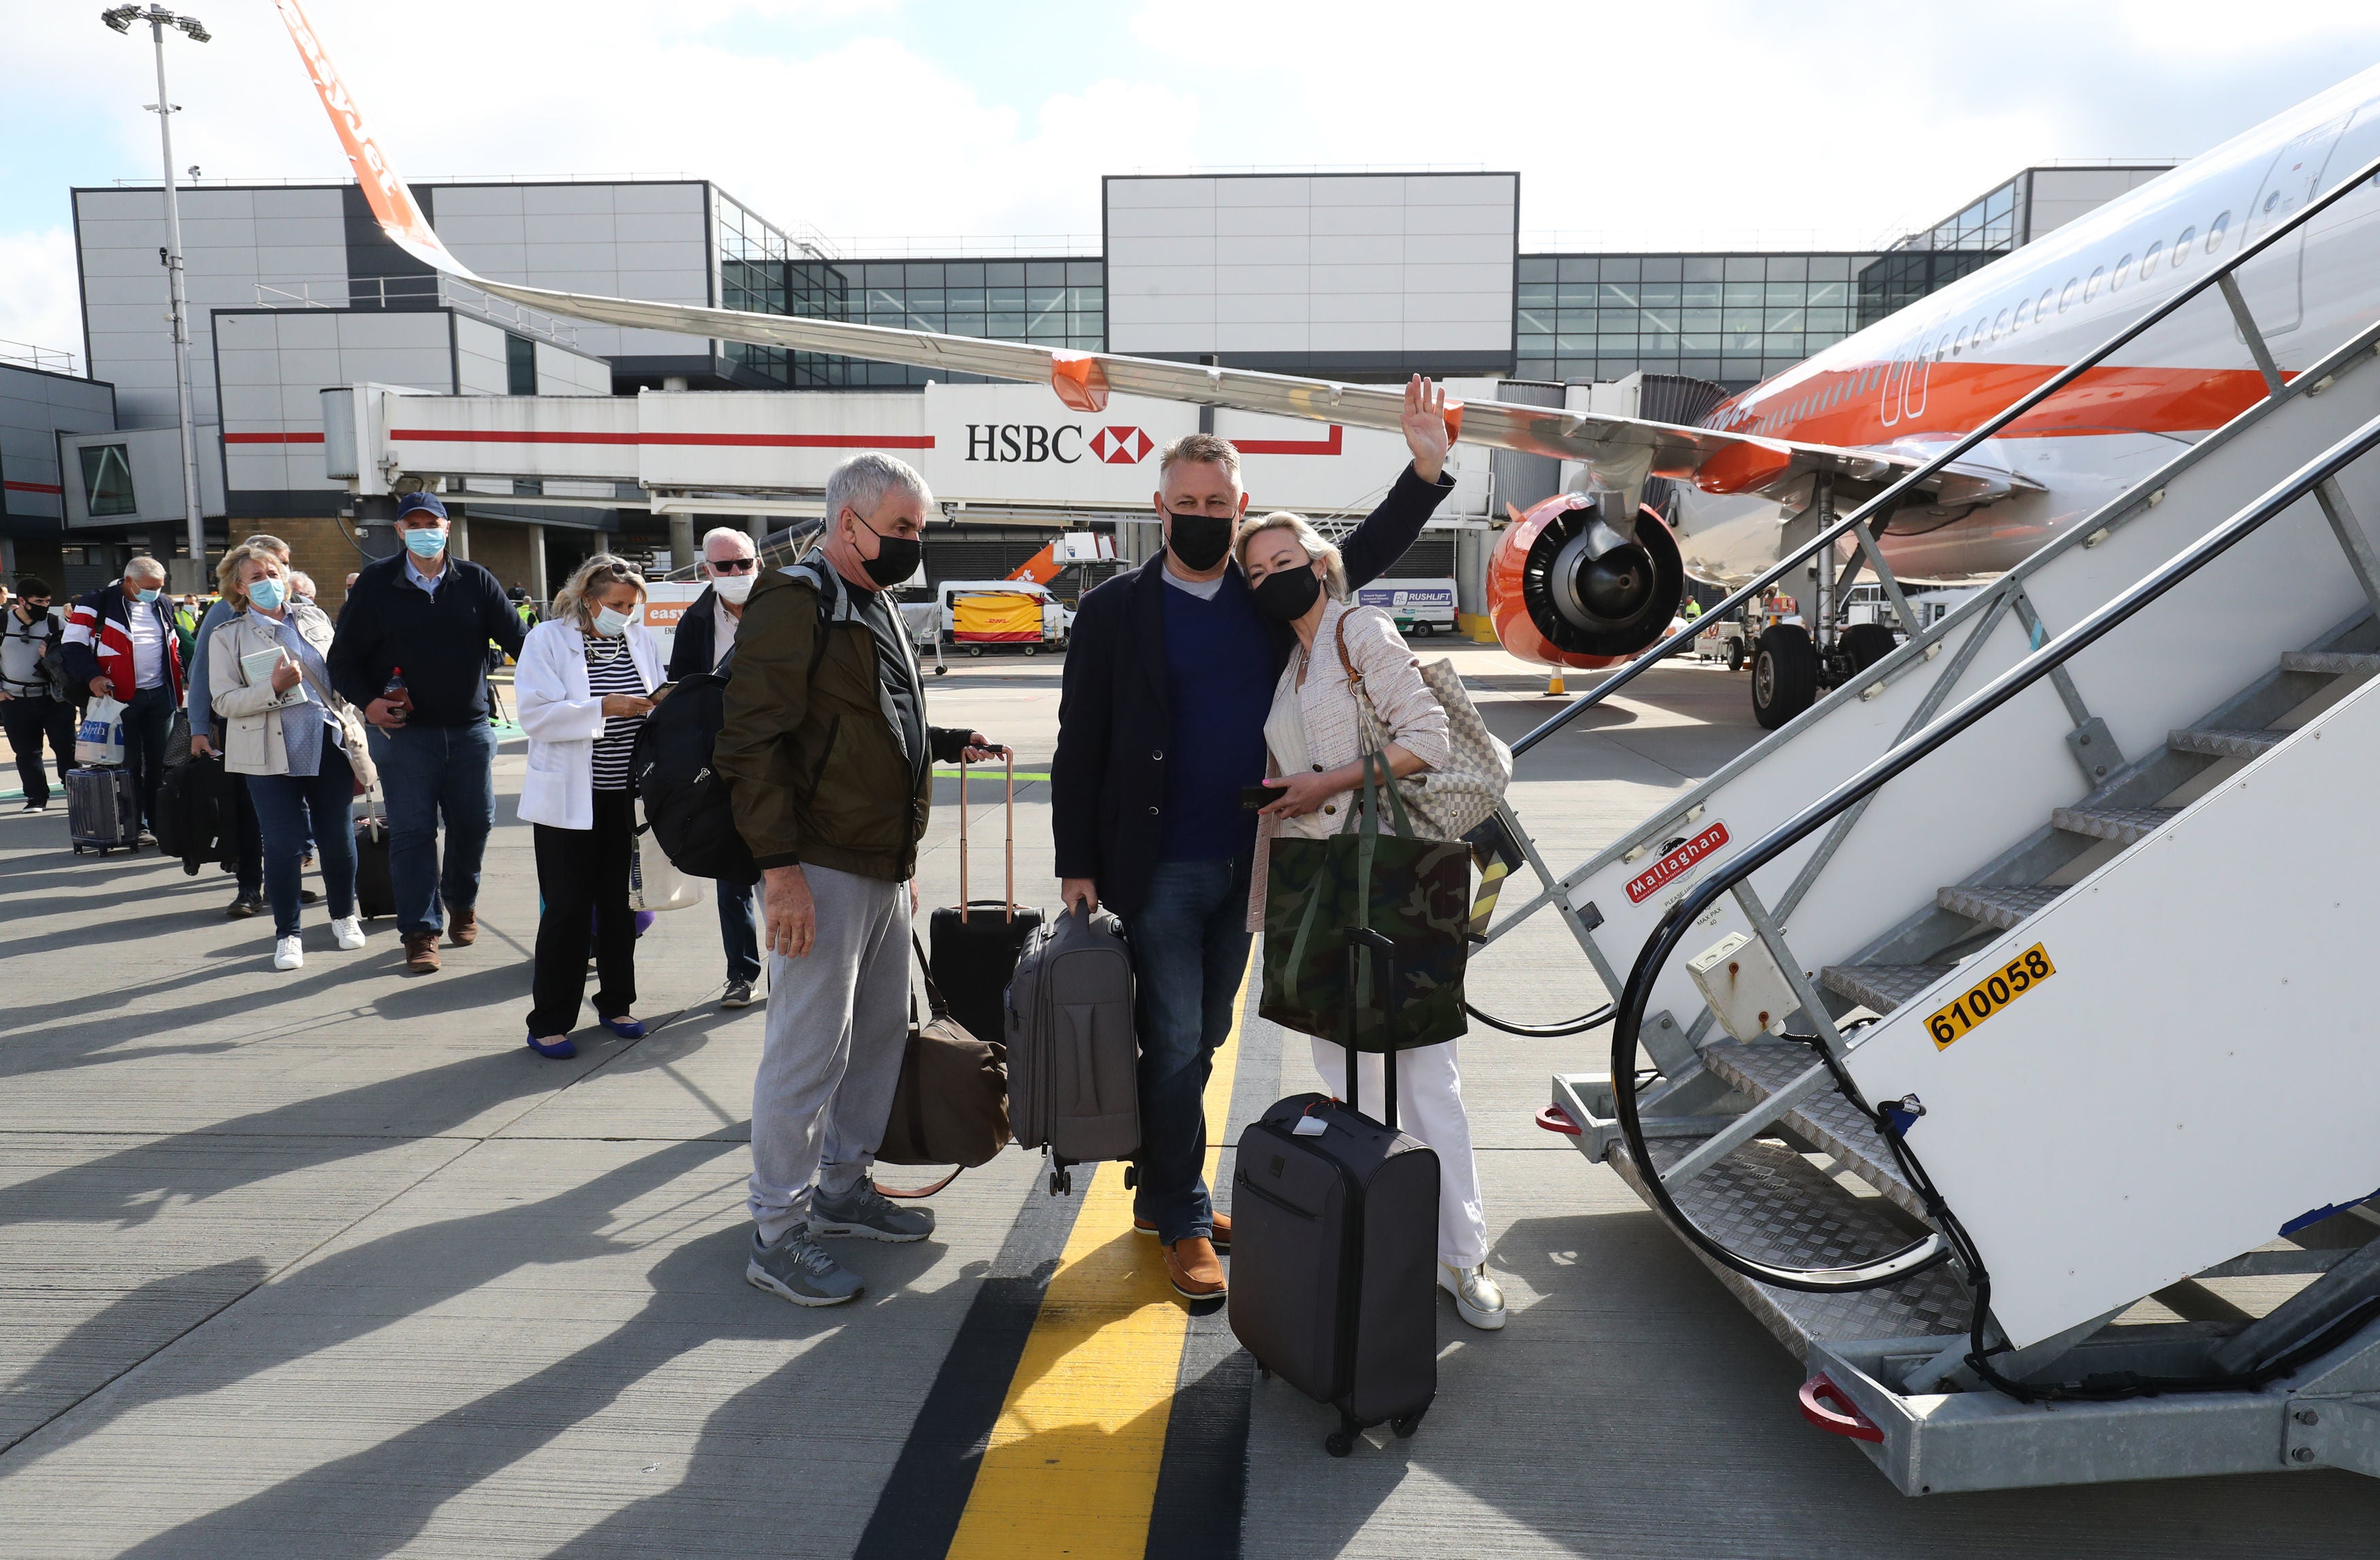 Passengers prepare to board an easyJet flight to Faro, Portugal, at Gatwick Airport